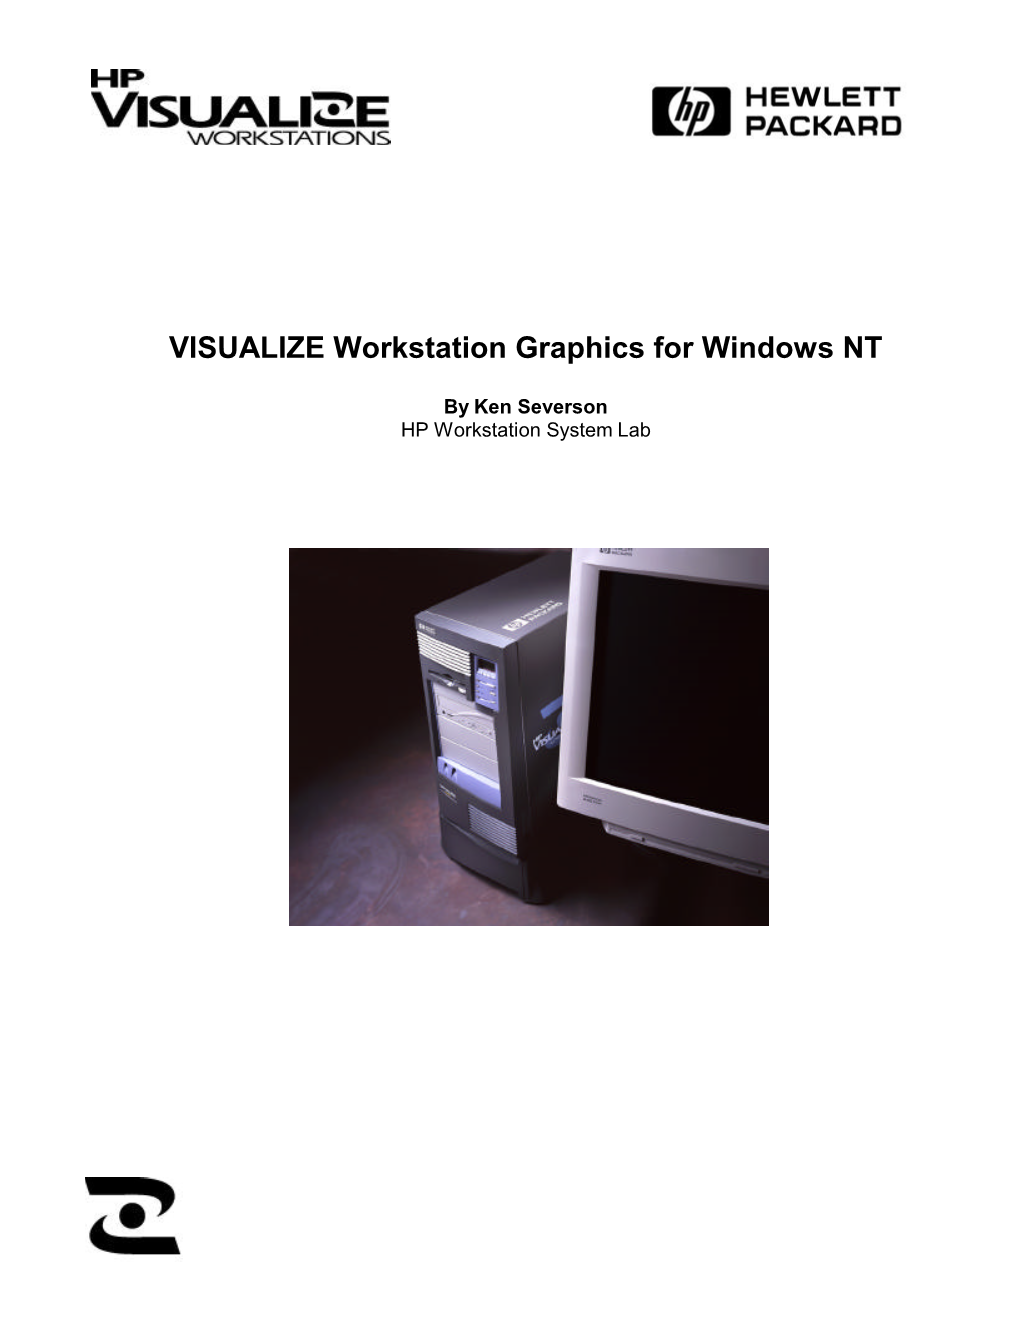 VISUALIZE Workstation Graphics for Windows NT